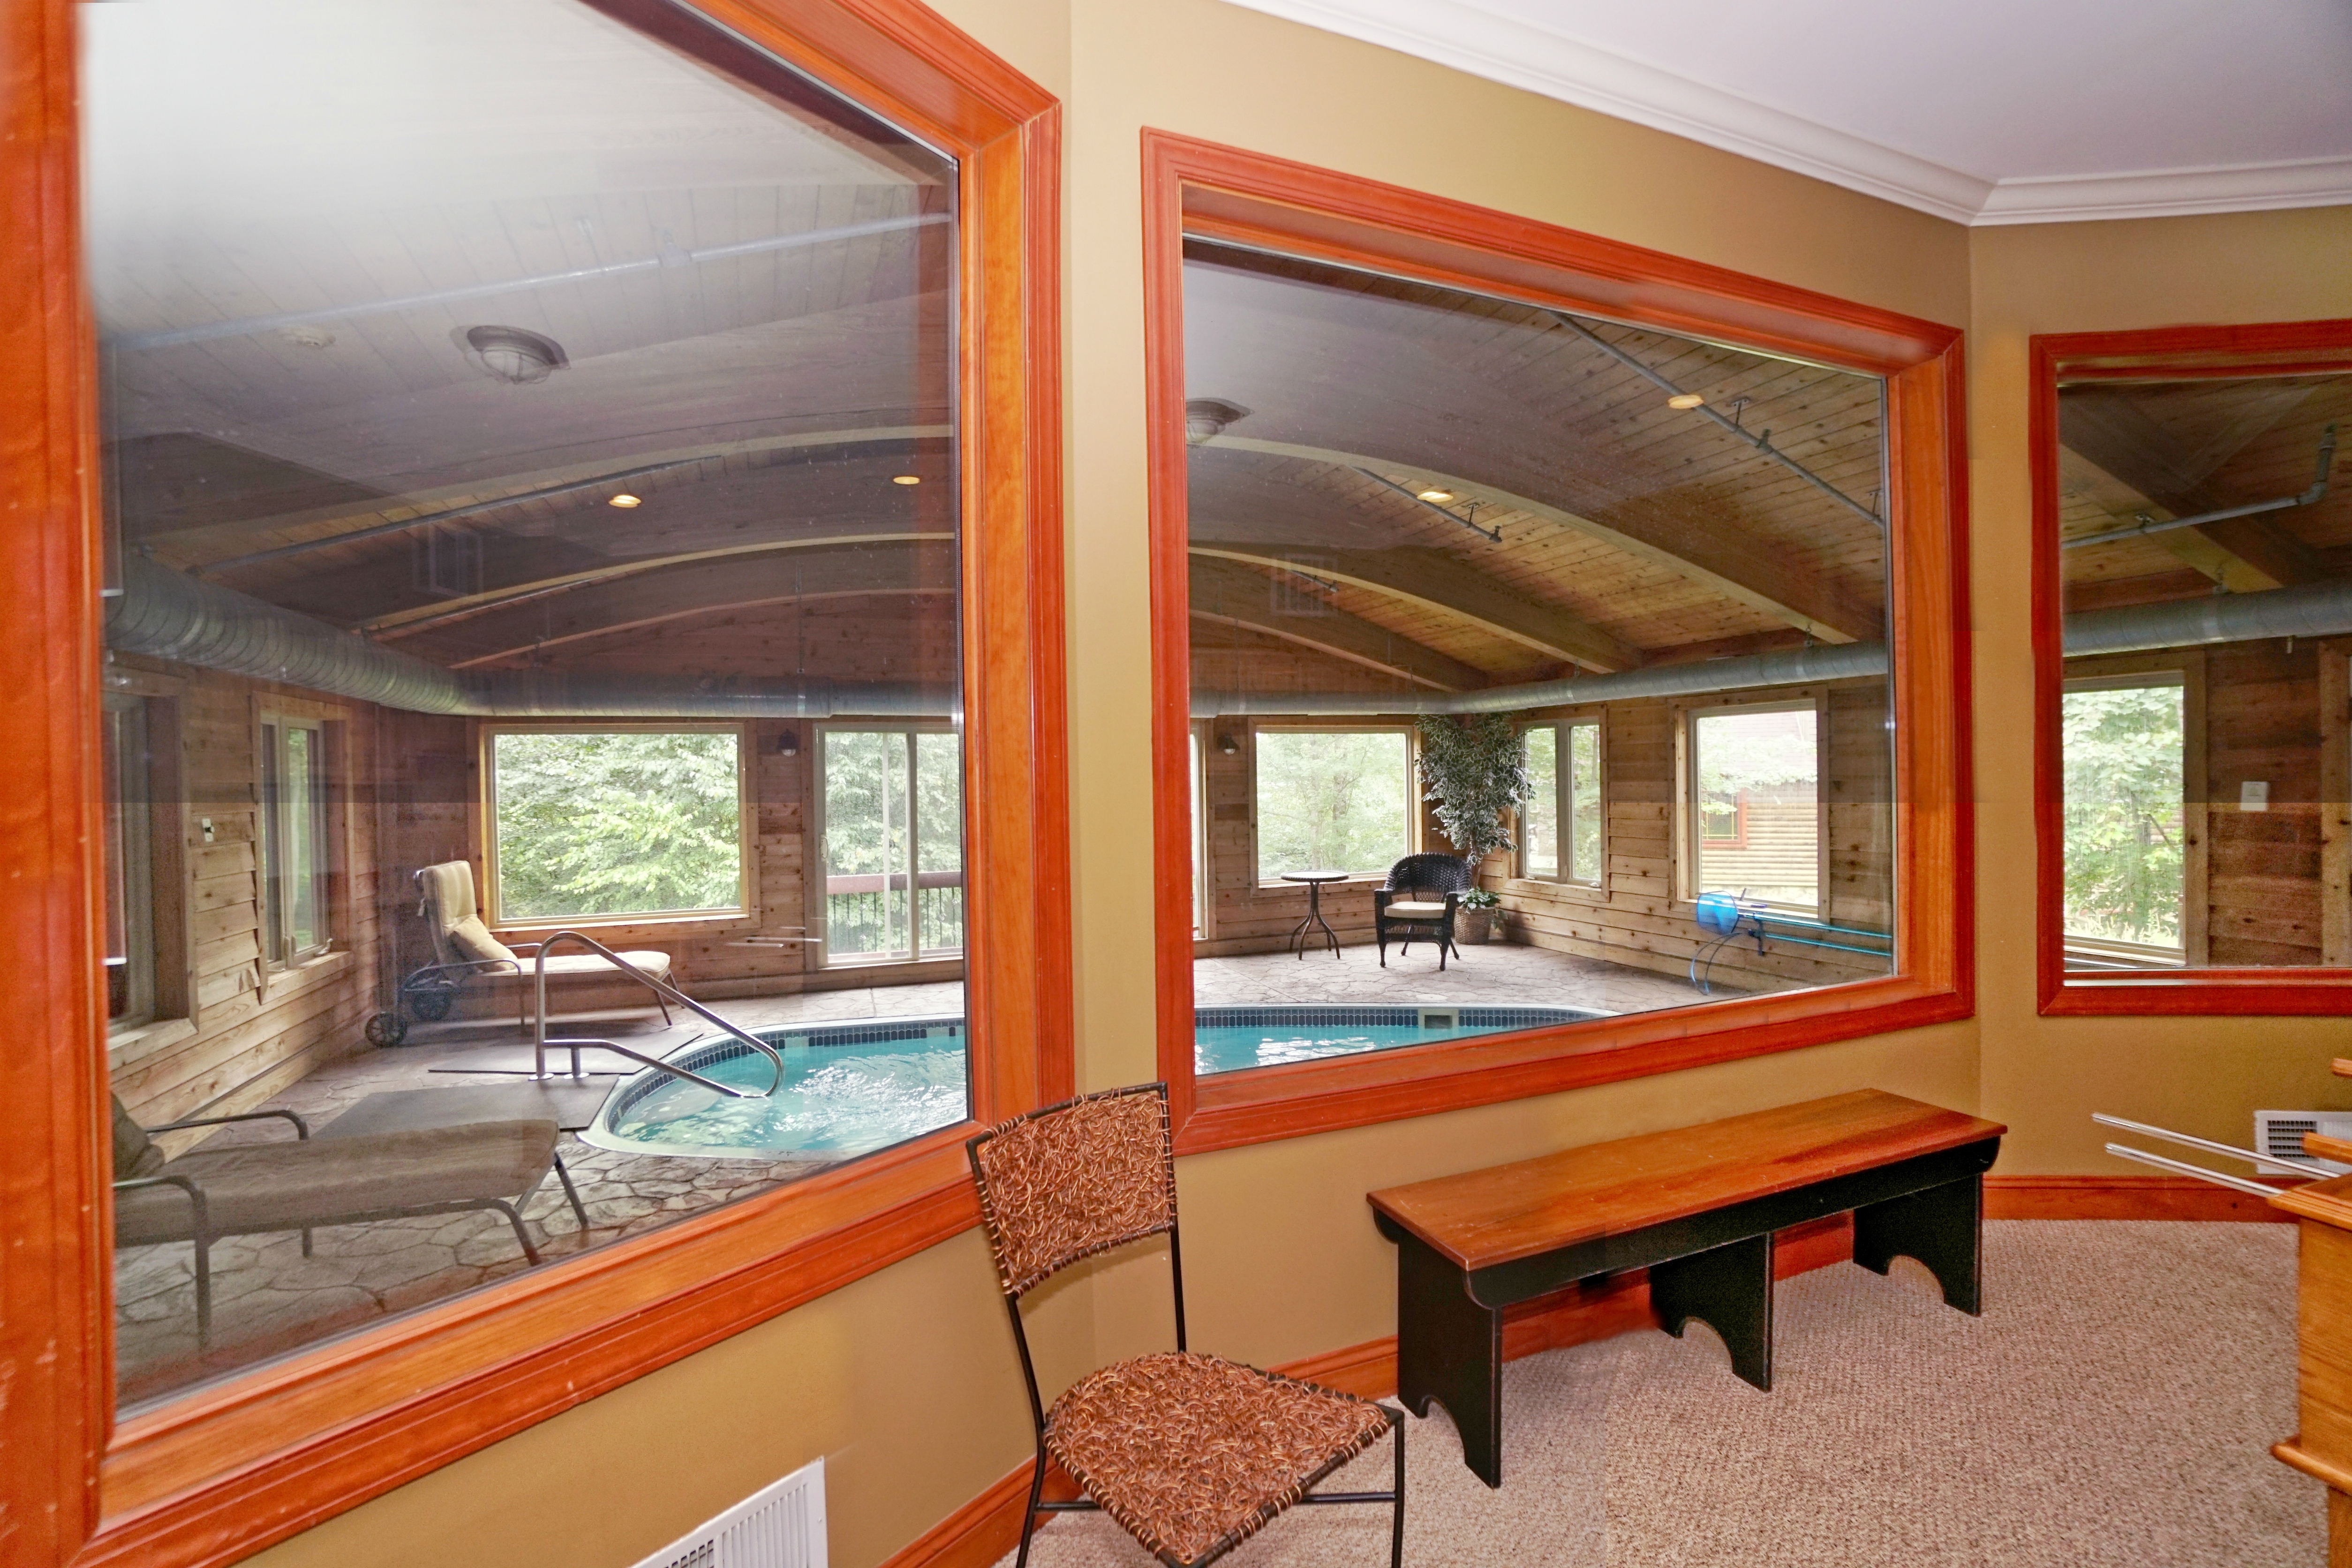 windows to indoor pool on entry level